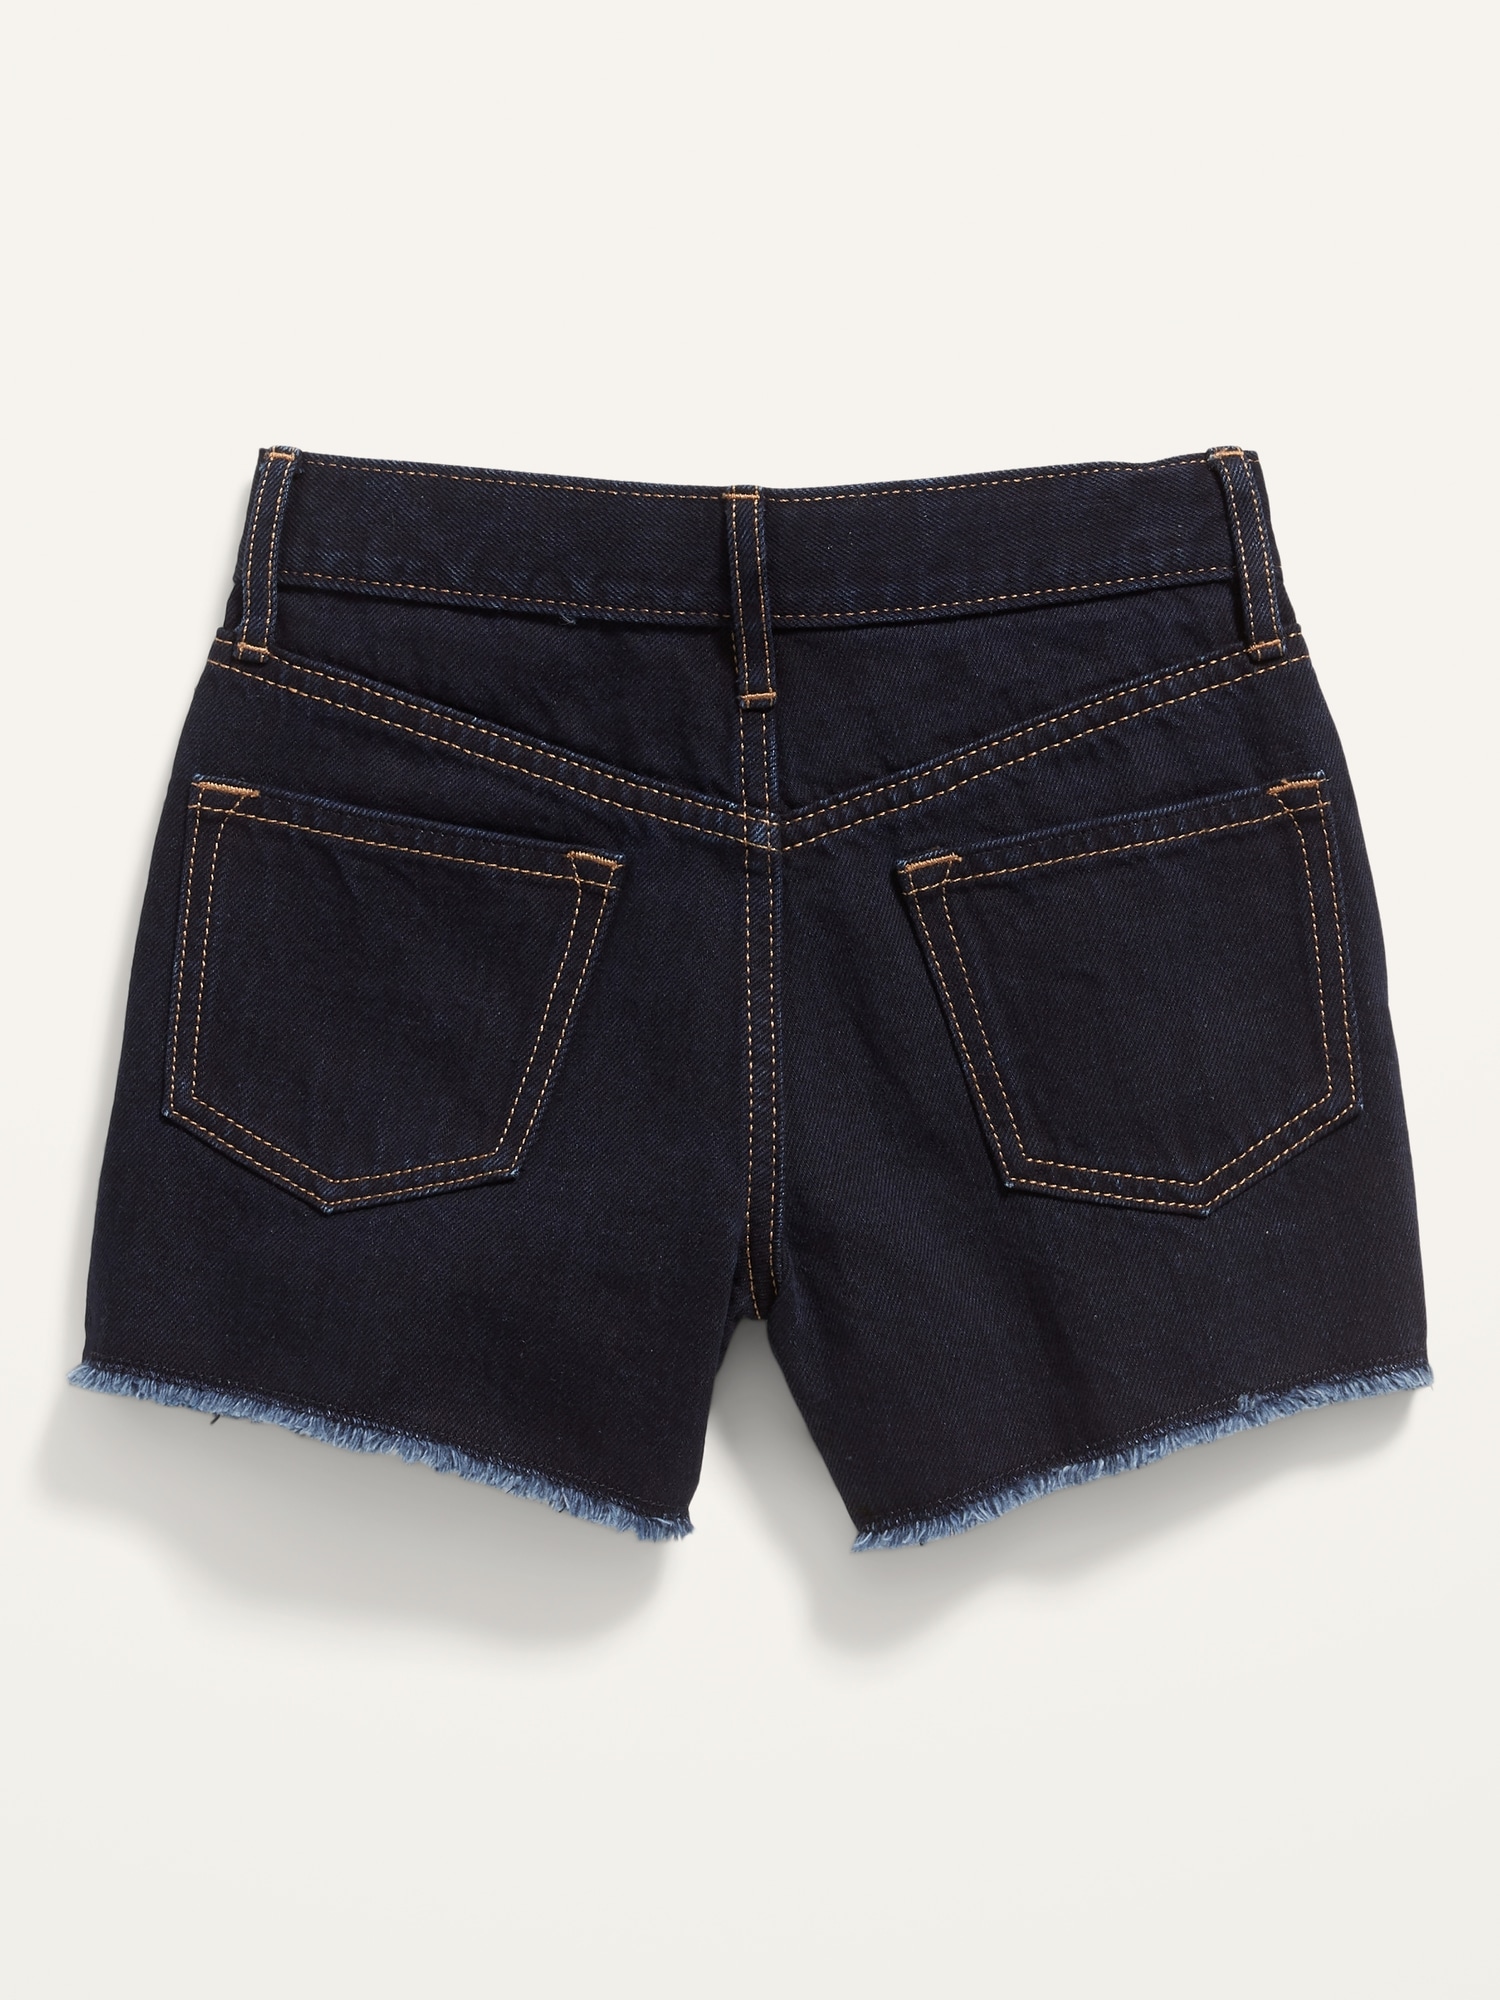 Extra High-Waisted Cut-Off Jean Shorts for Girls | Old Navy